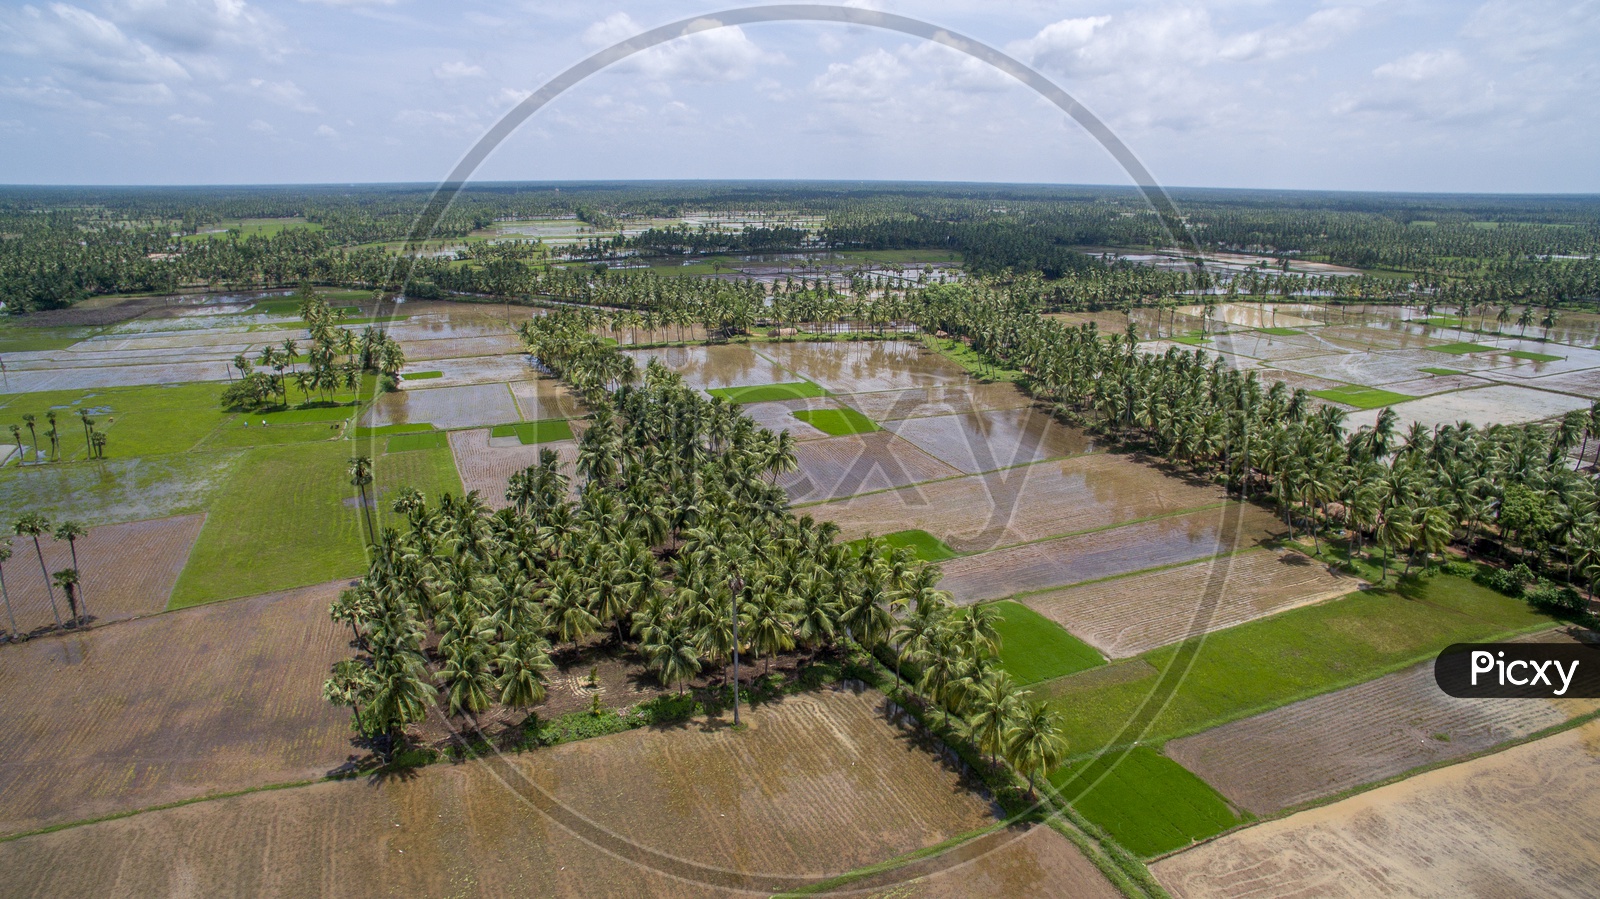 Paddy fields and coconut groves